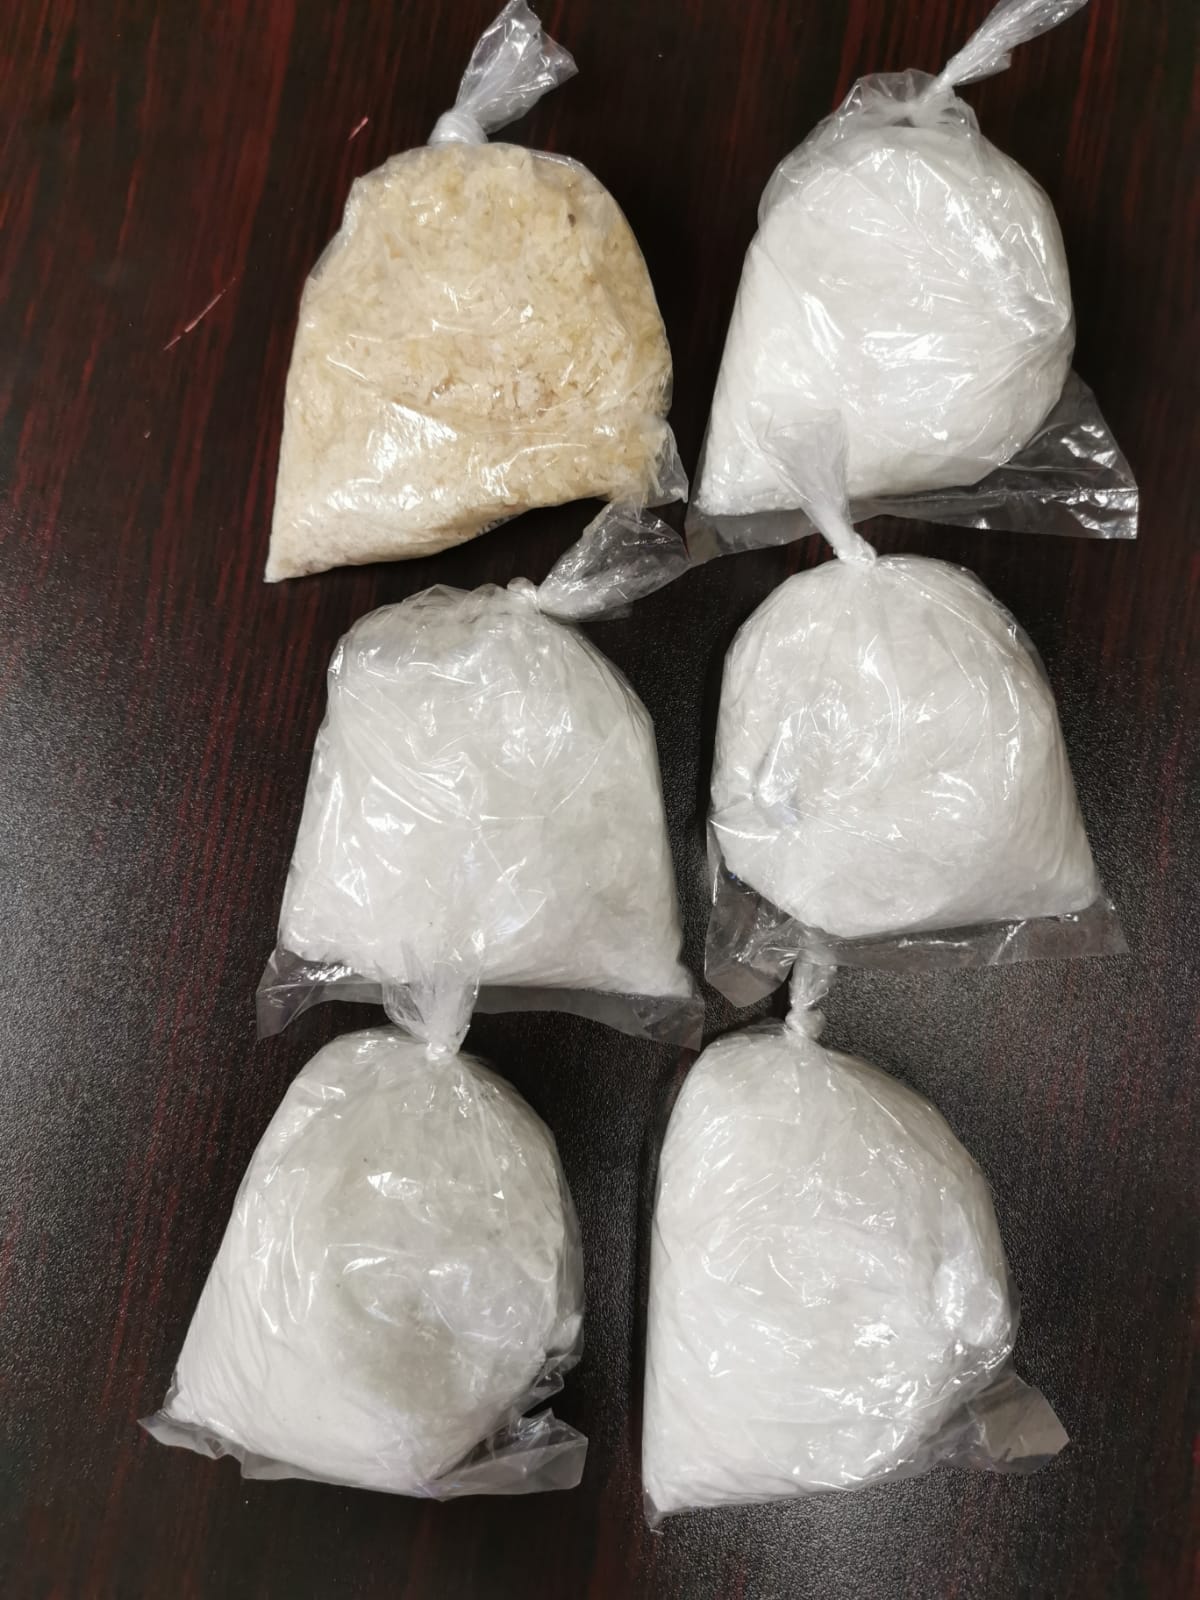 Suspect arrested for dealing in drugs